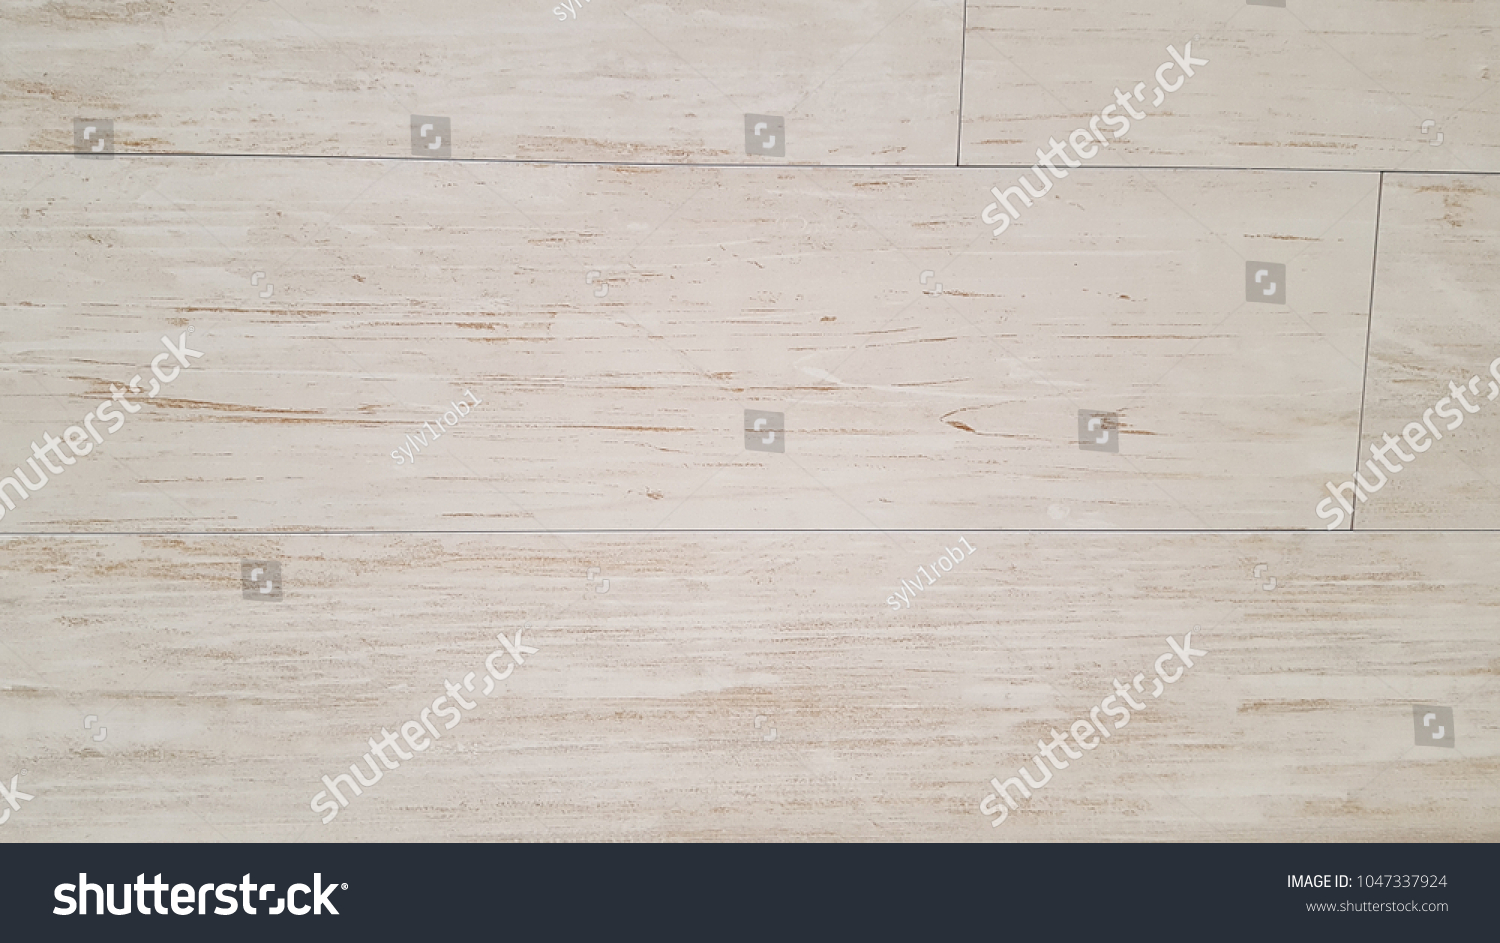 Wood pattern and texture for background #1047337924